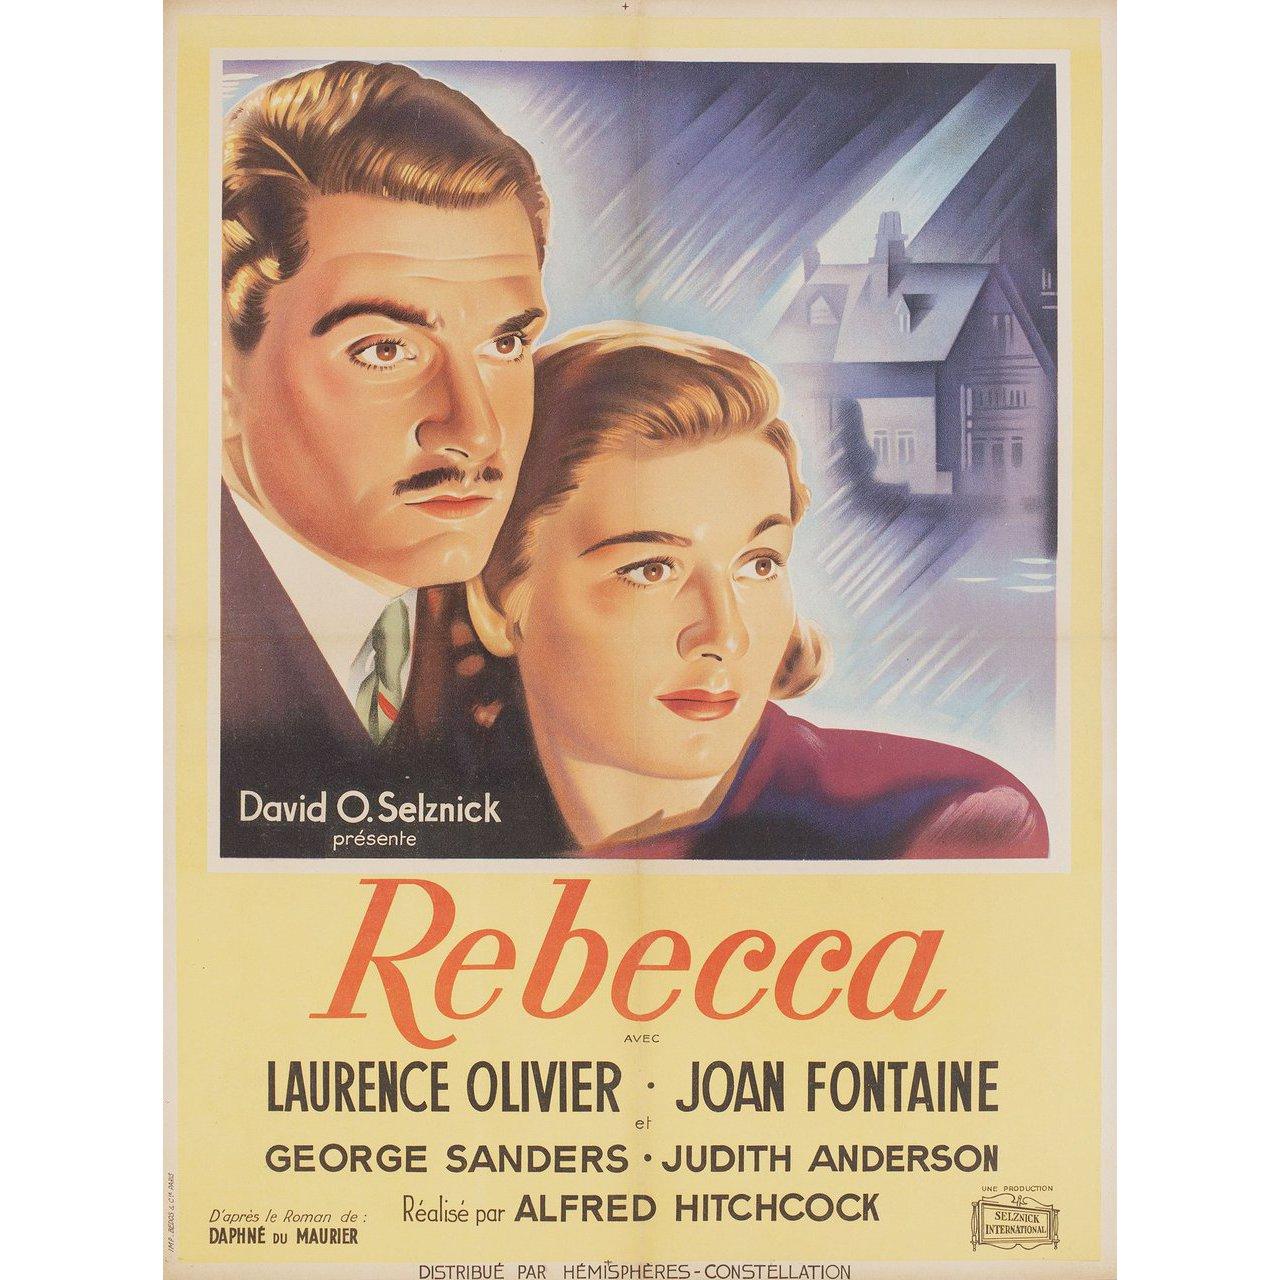 Original 1947 French moyenne poster for the first French theatrical release of the 1940 film Rebecca directed by Alfred Hitchcock with Laurence Olivier / Joan Fontaine / George Sanders / Judith Anderson. Fine condition, linen-backed. This poster has